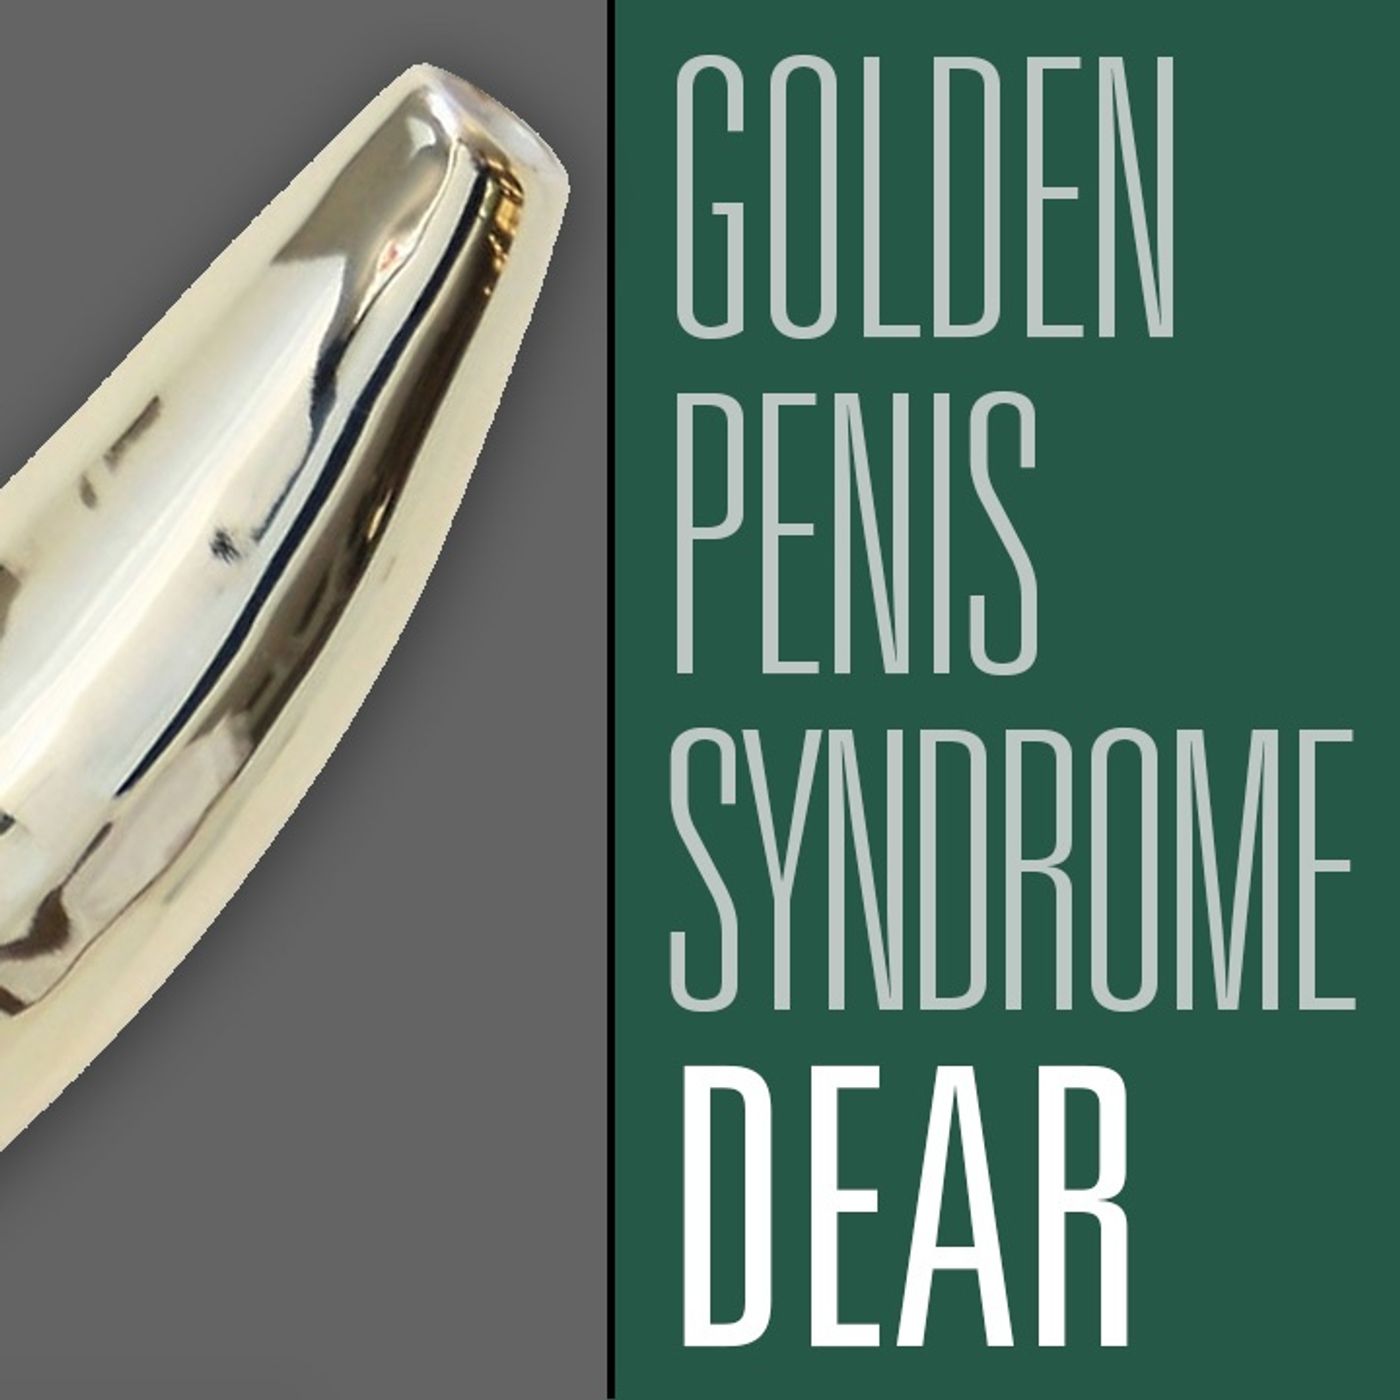 Men with ‘golden penis syndrome’ are ruining sex and dating for women | Dear Badger 11